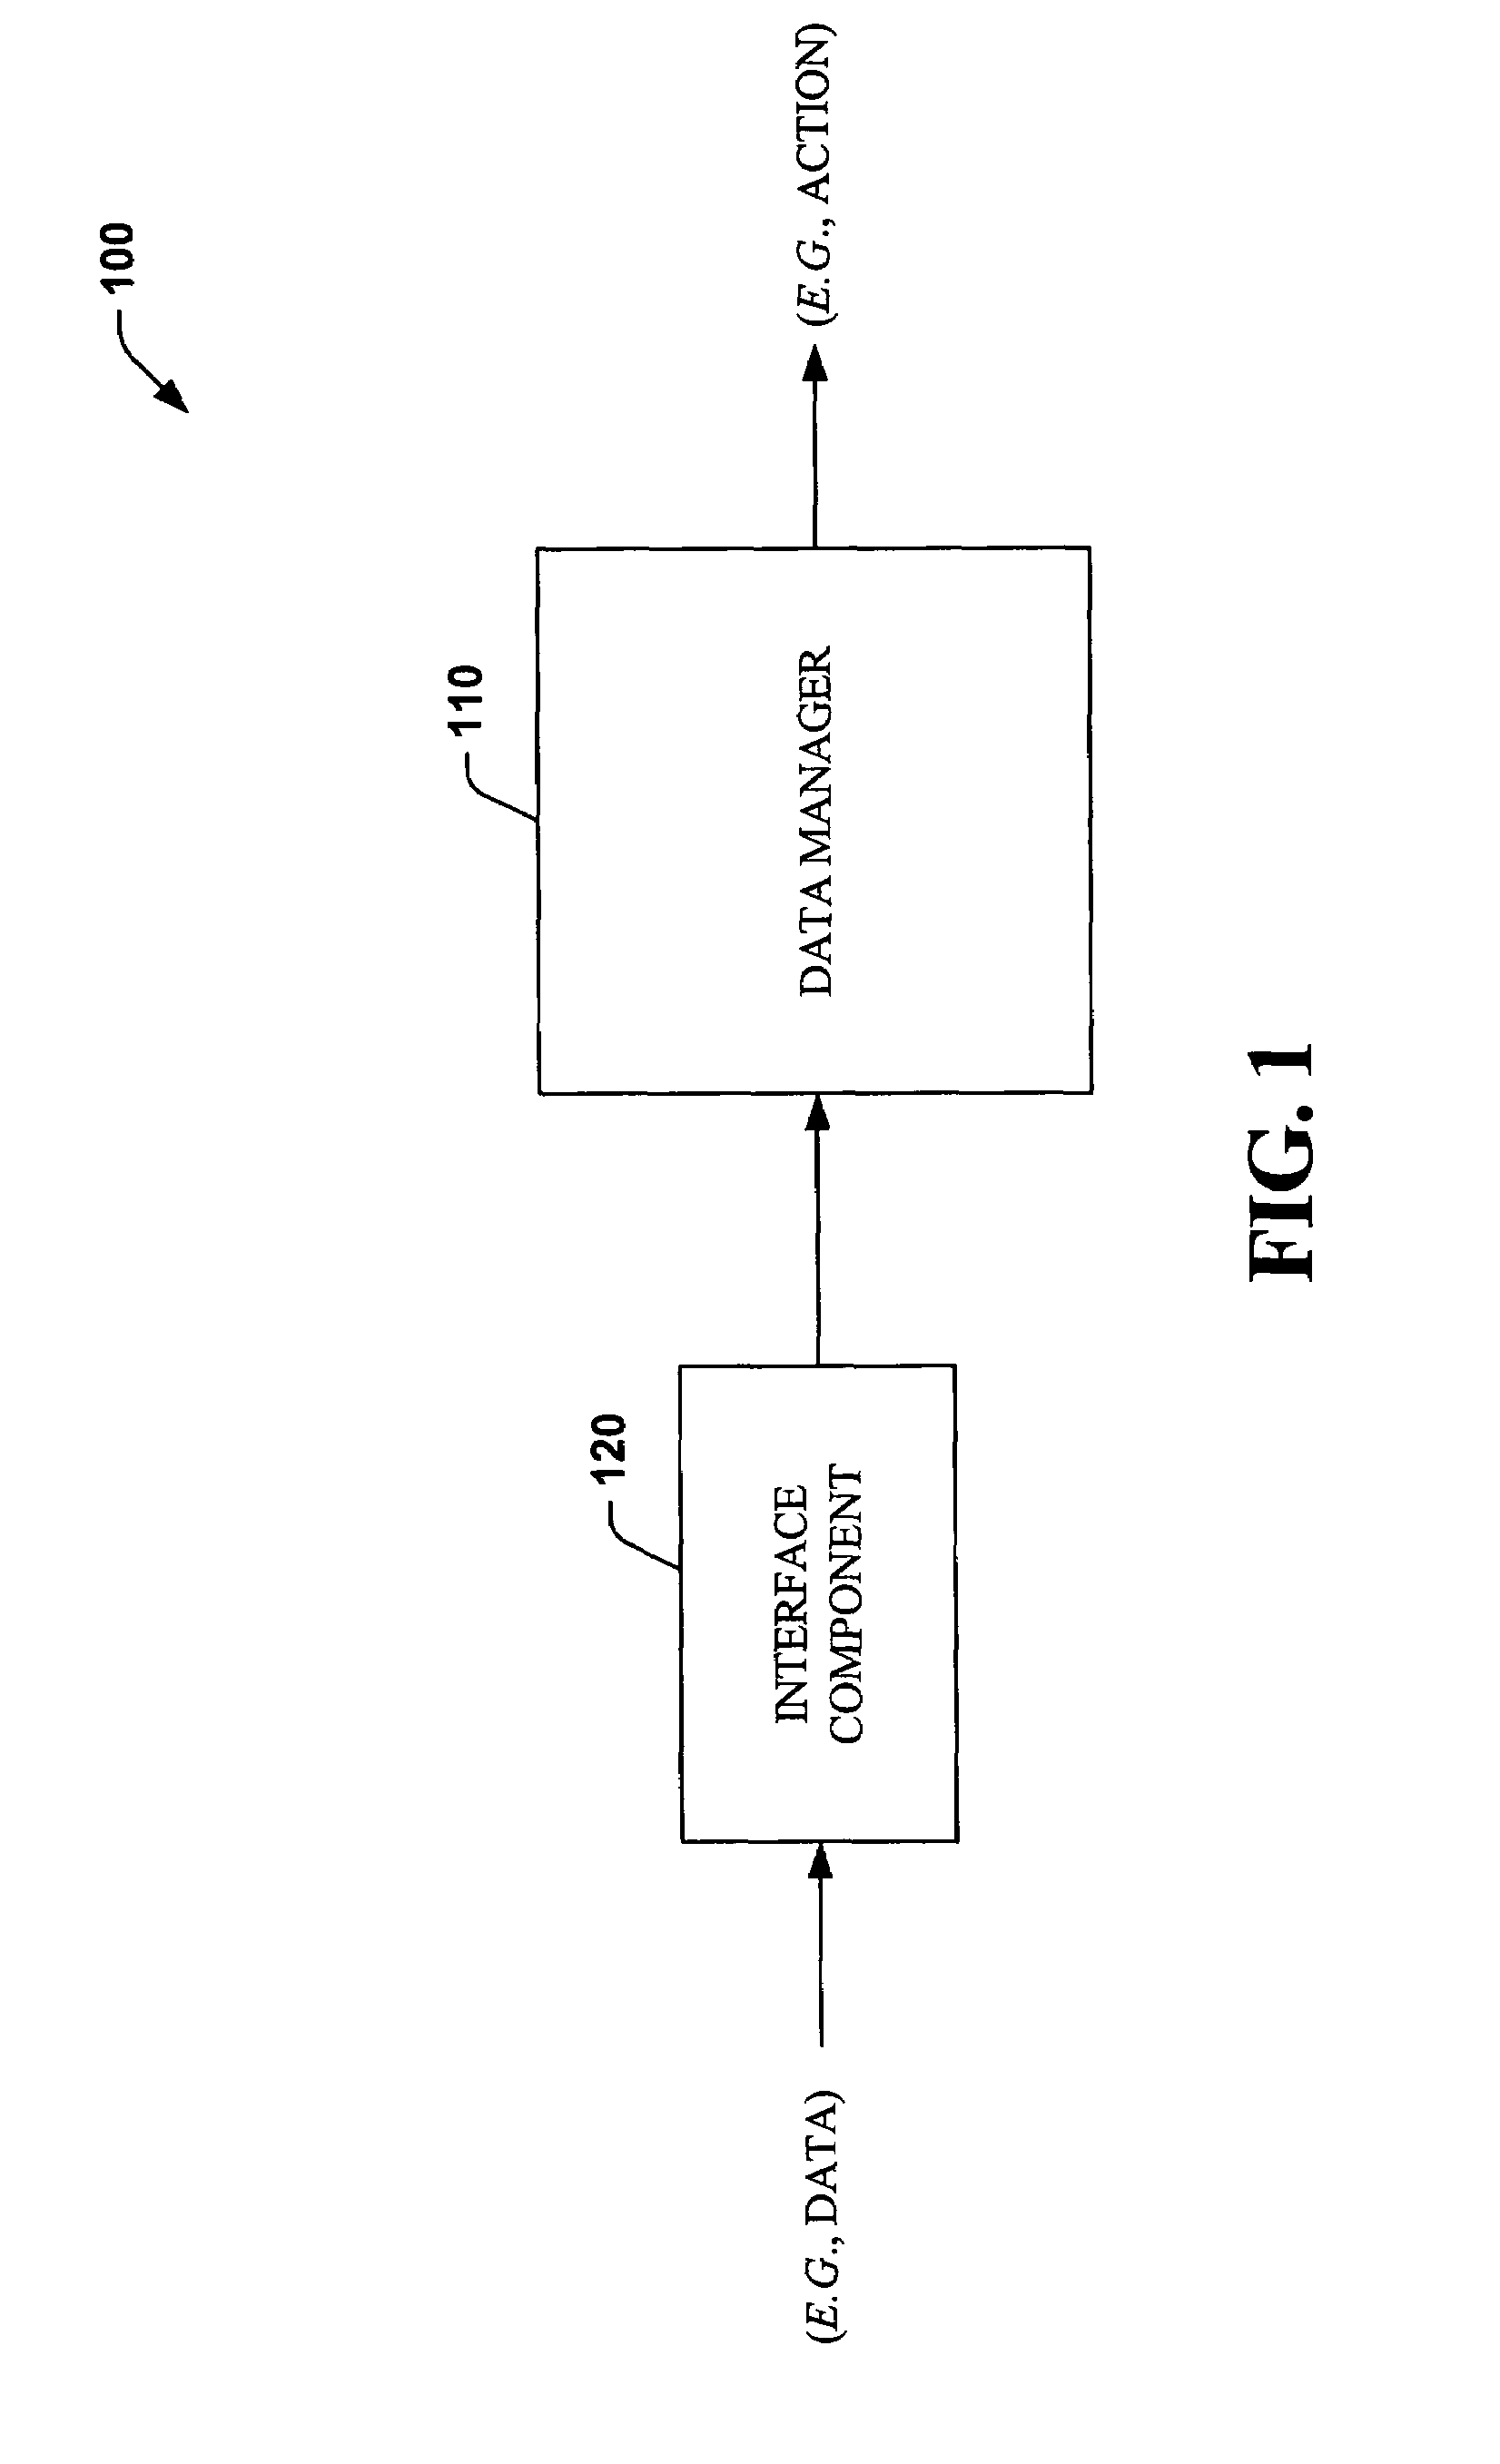 Systems and methods that determine intent of data and respond to the data based on the intent